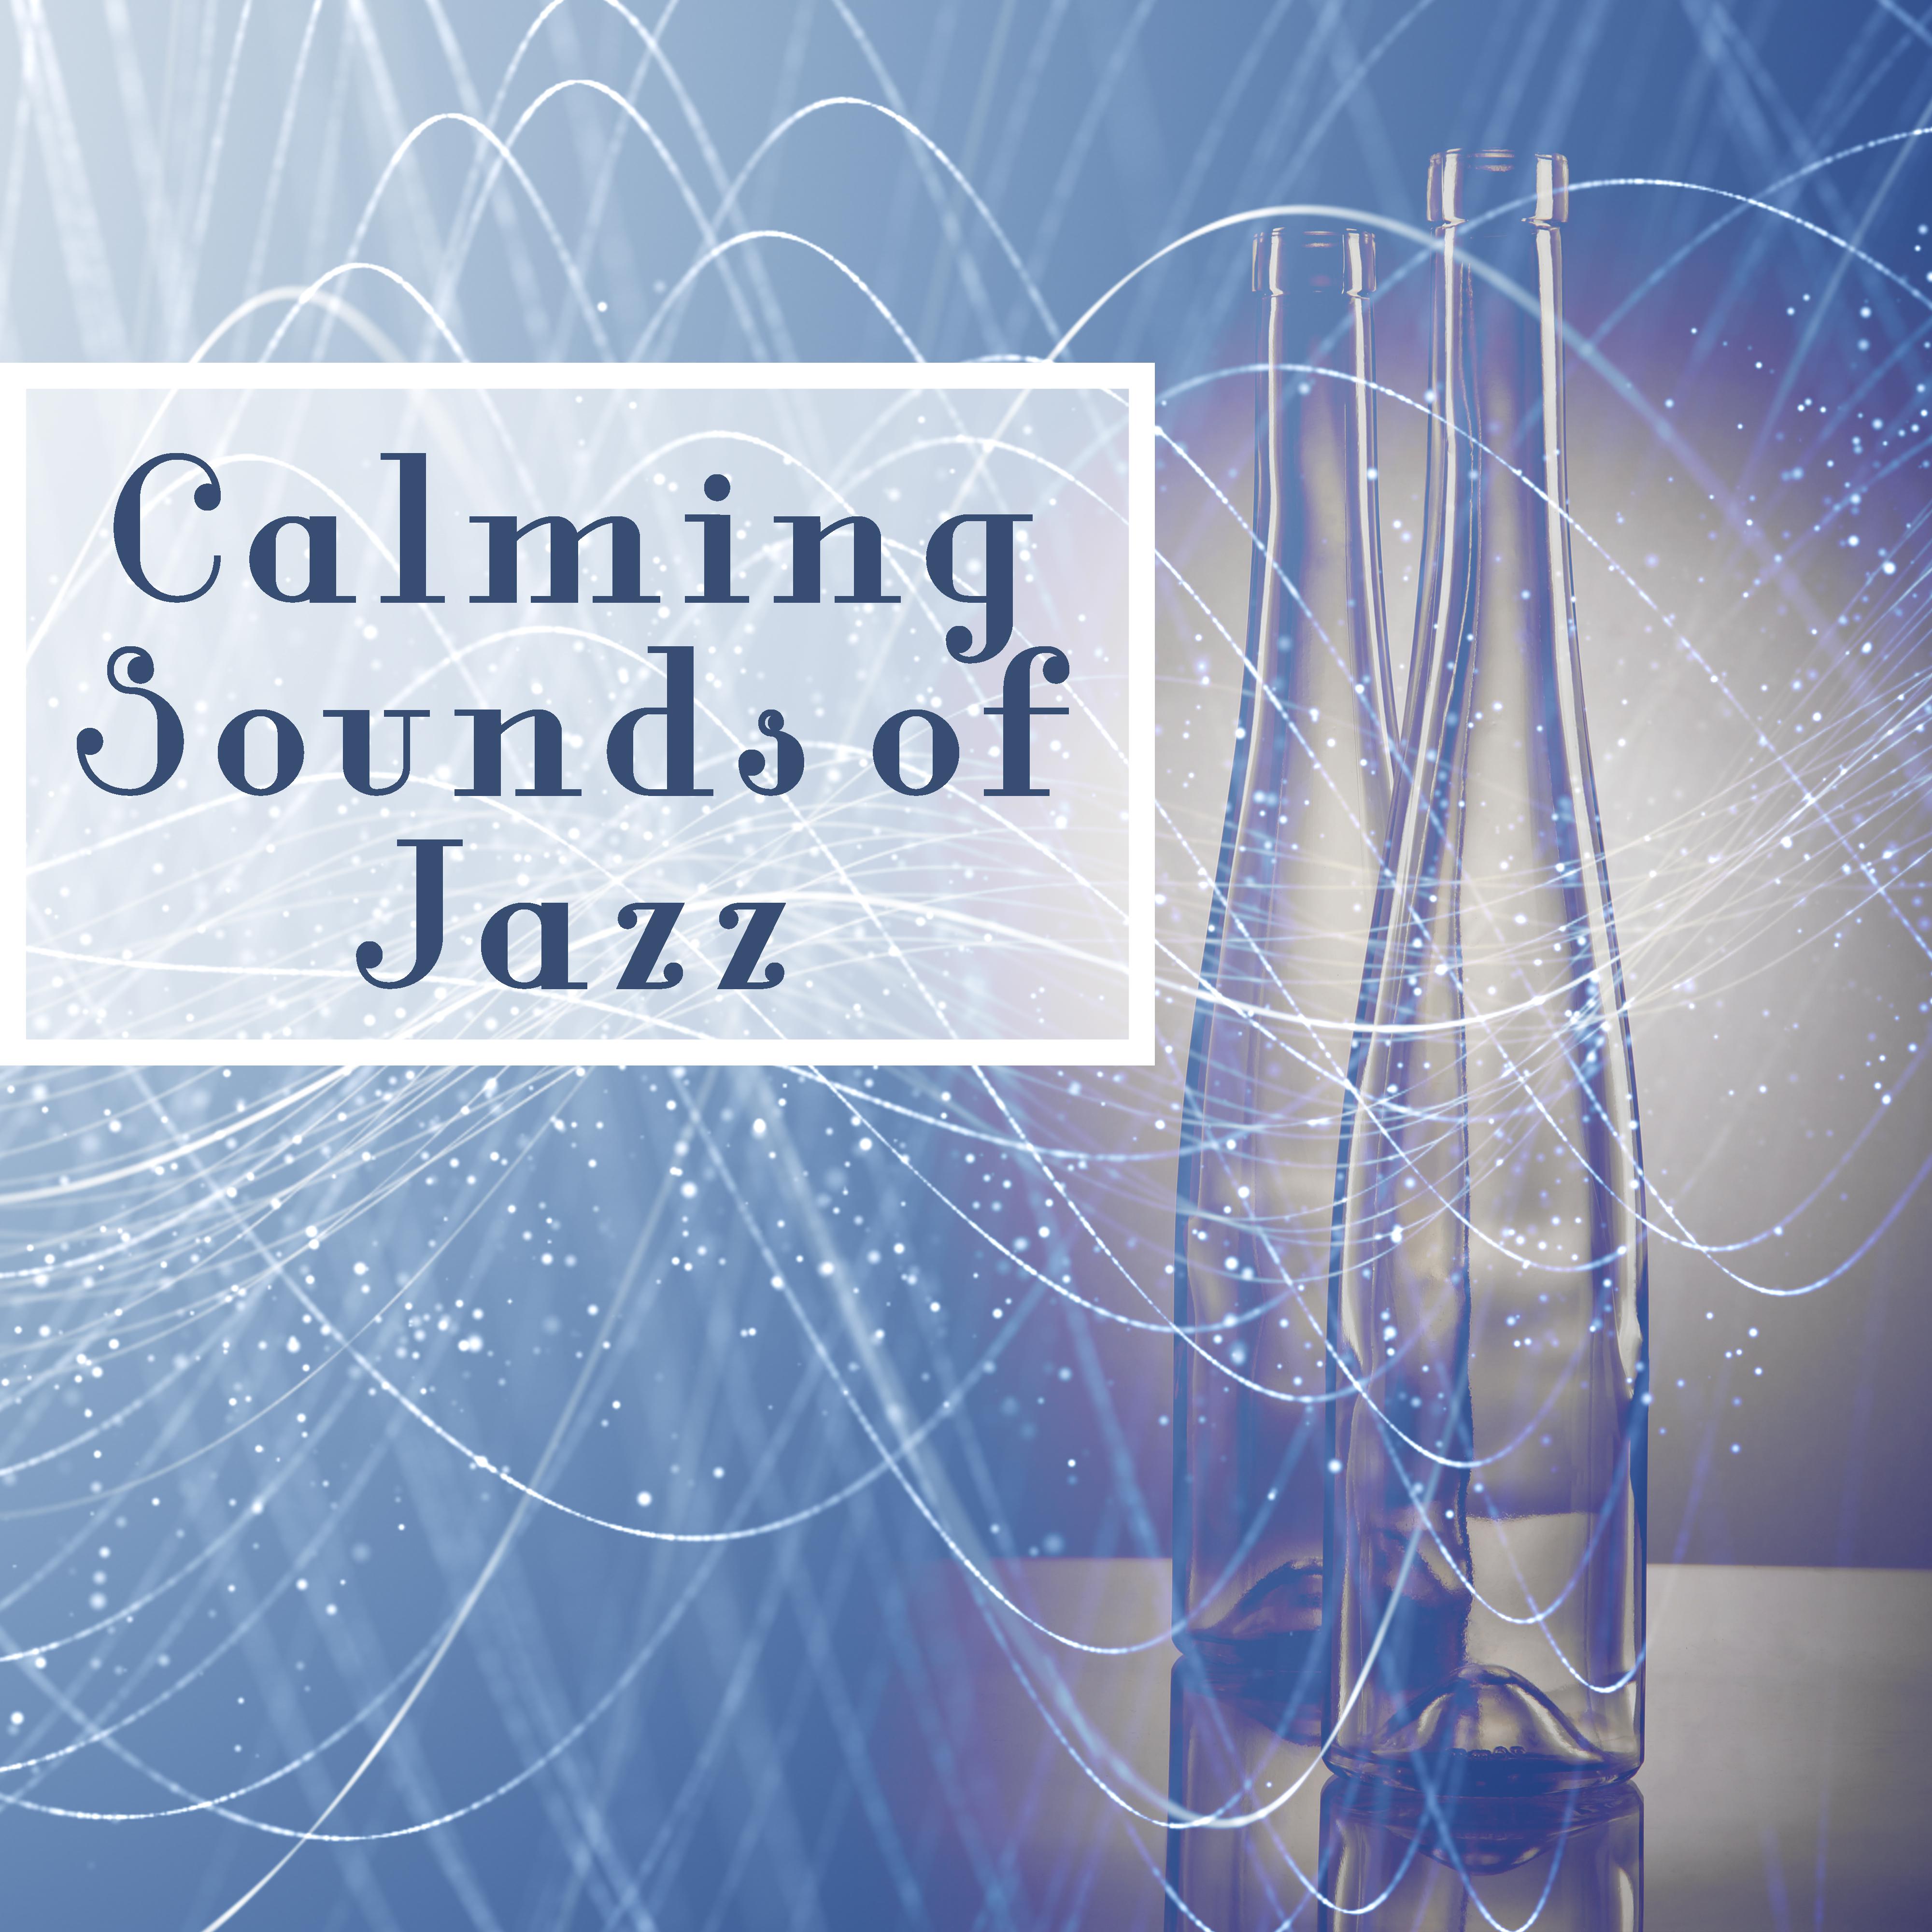 Calming Sounds of Jazz  Soft Sounds to Relax, Peaceful Music to Calm Down, Jazz Melodies